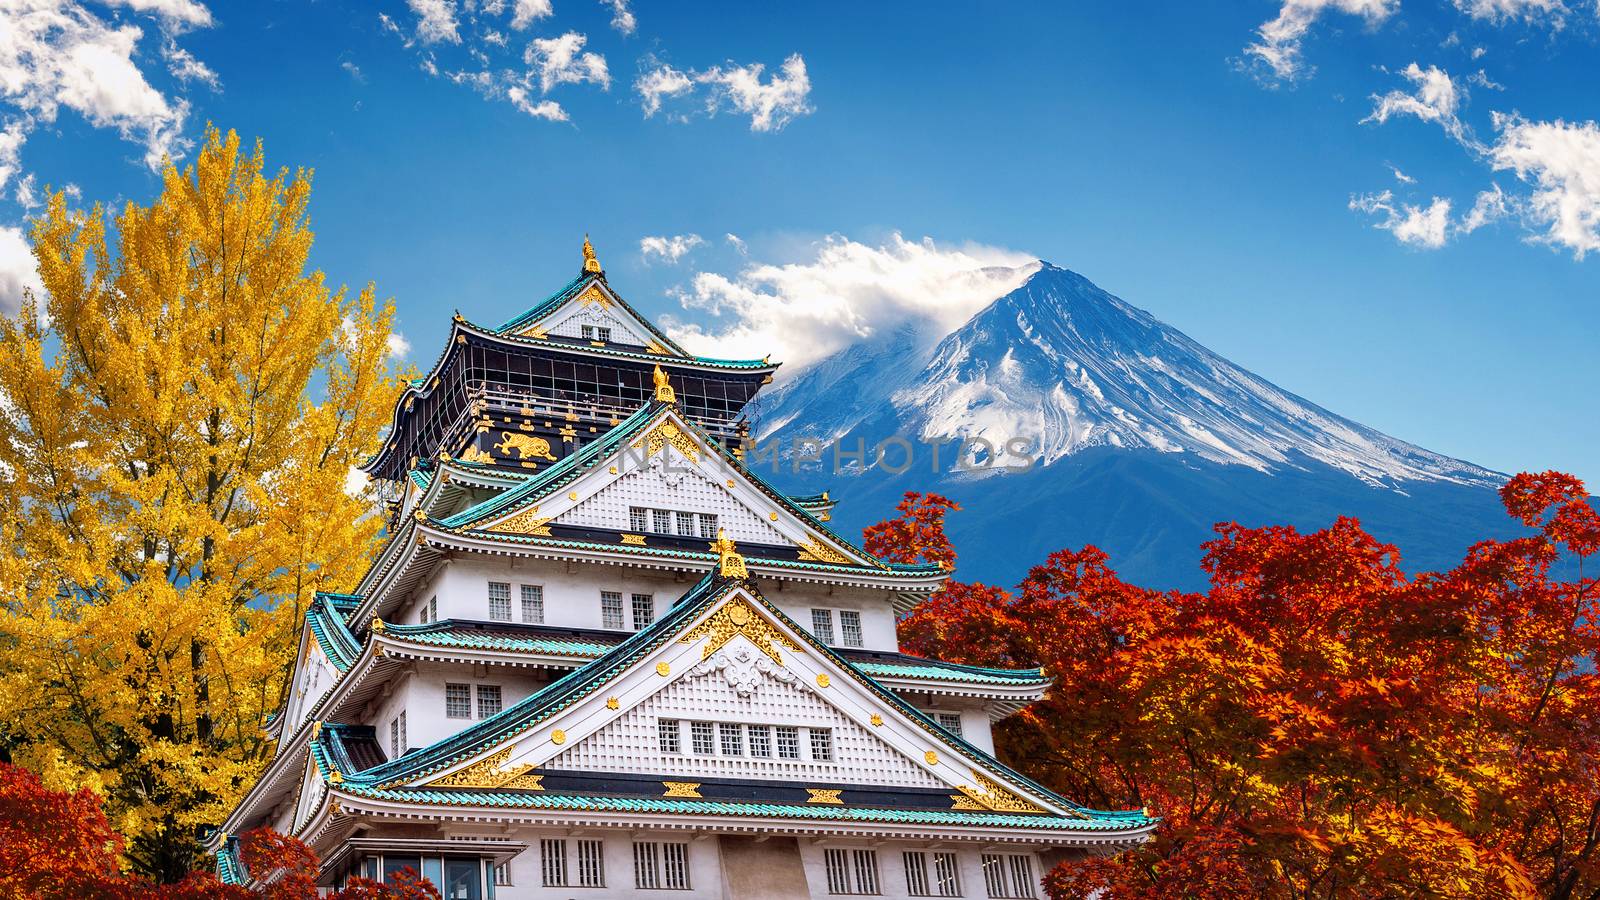 Autumn season with Fuji mountain and Castle in Japan.